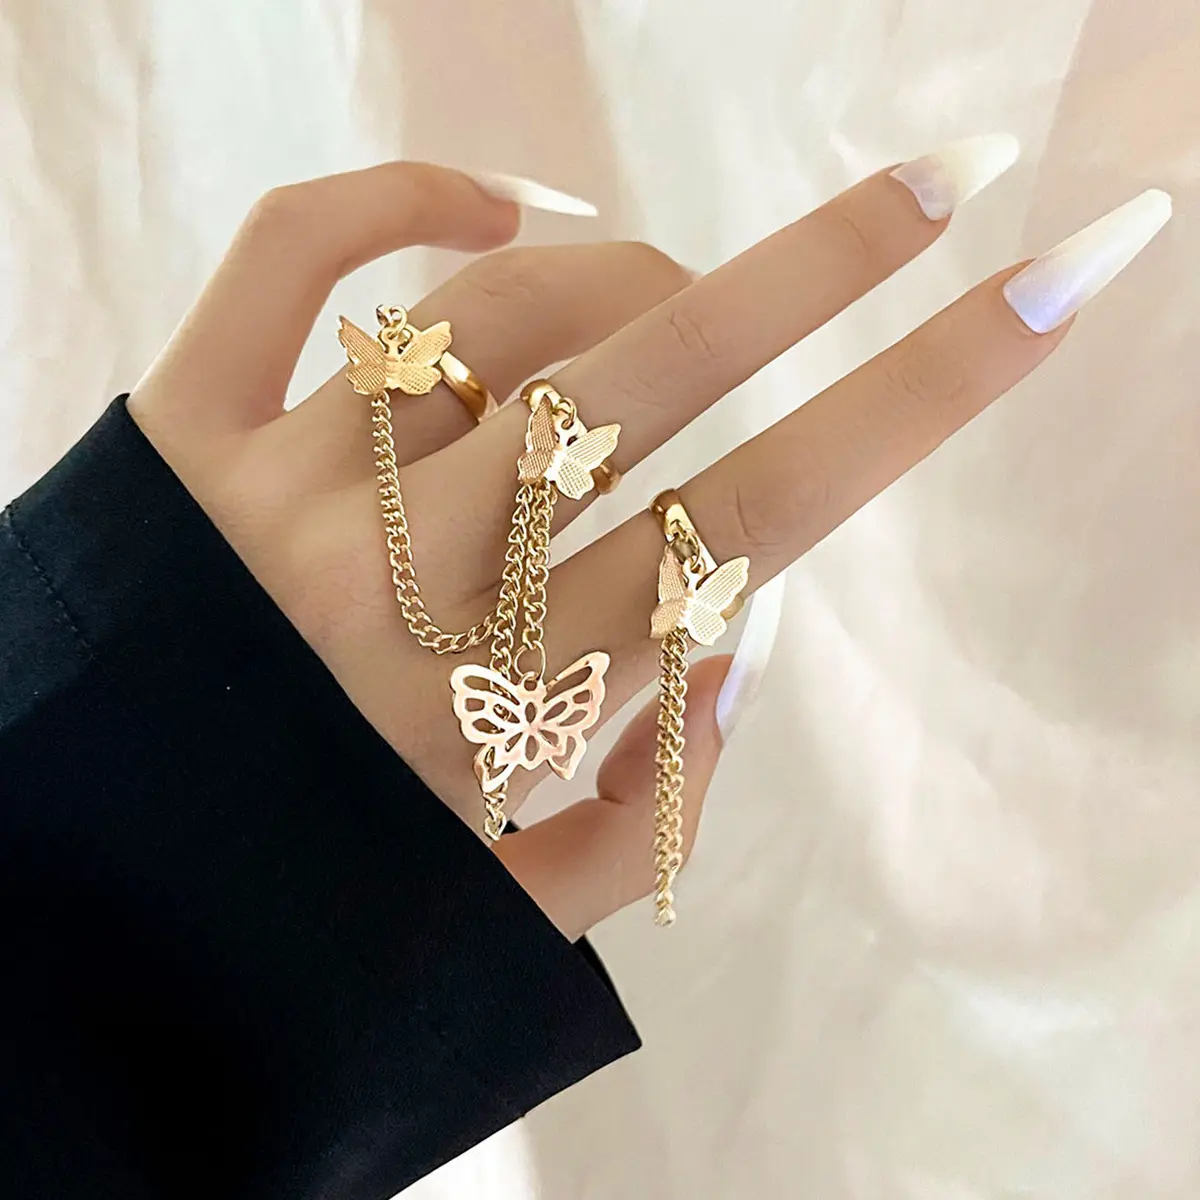 Gold Vintage Punk Butterfly Ring With Bracelet Link Wrist Chain Women Charms Finger Bracelet Lady Trendy Aesthetic Jewelry Gift